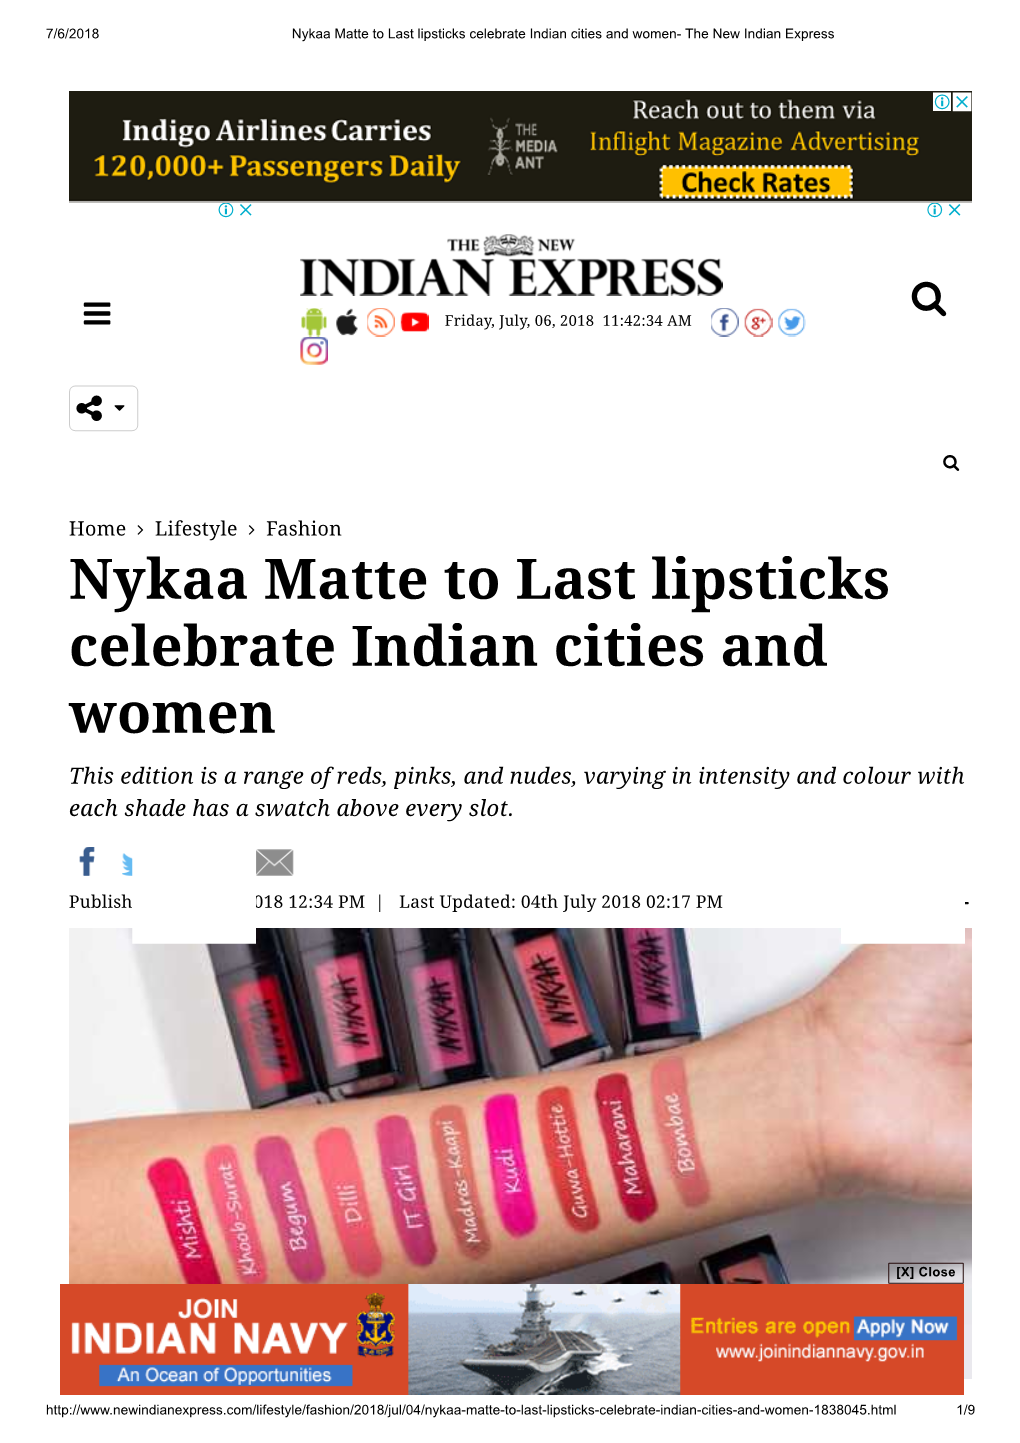 Nykaa Matte to Last Lipsticks Celebrate Indian Cities and Women- the New Indian Express